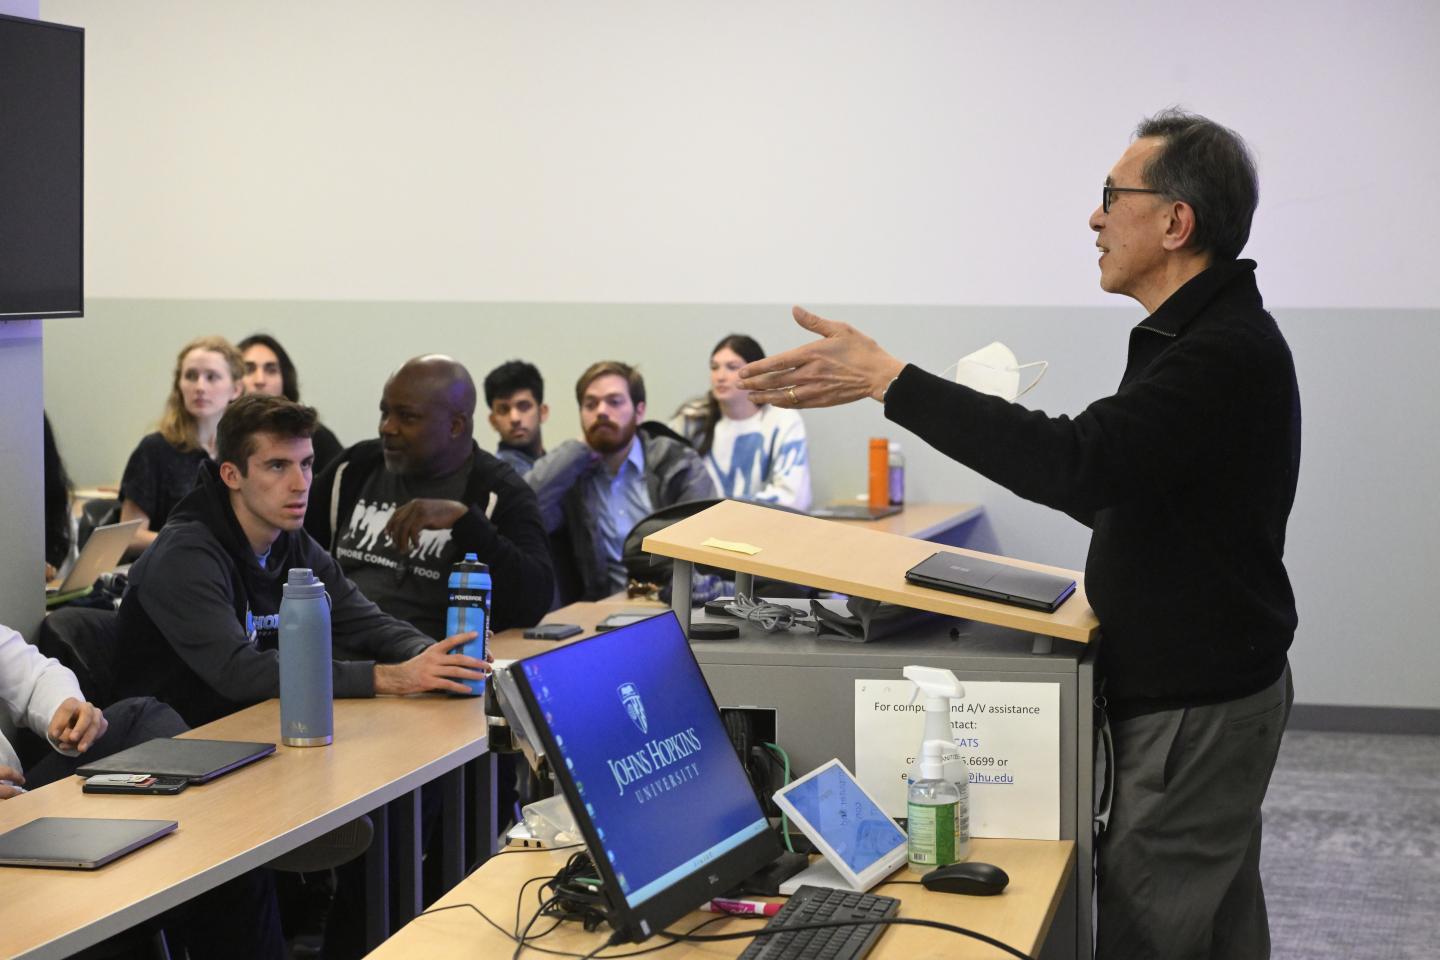 Johns Hopkins professor Fadil Santosa speaks to students in his “Mathematics for a Better World” course.